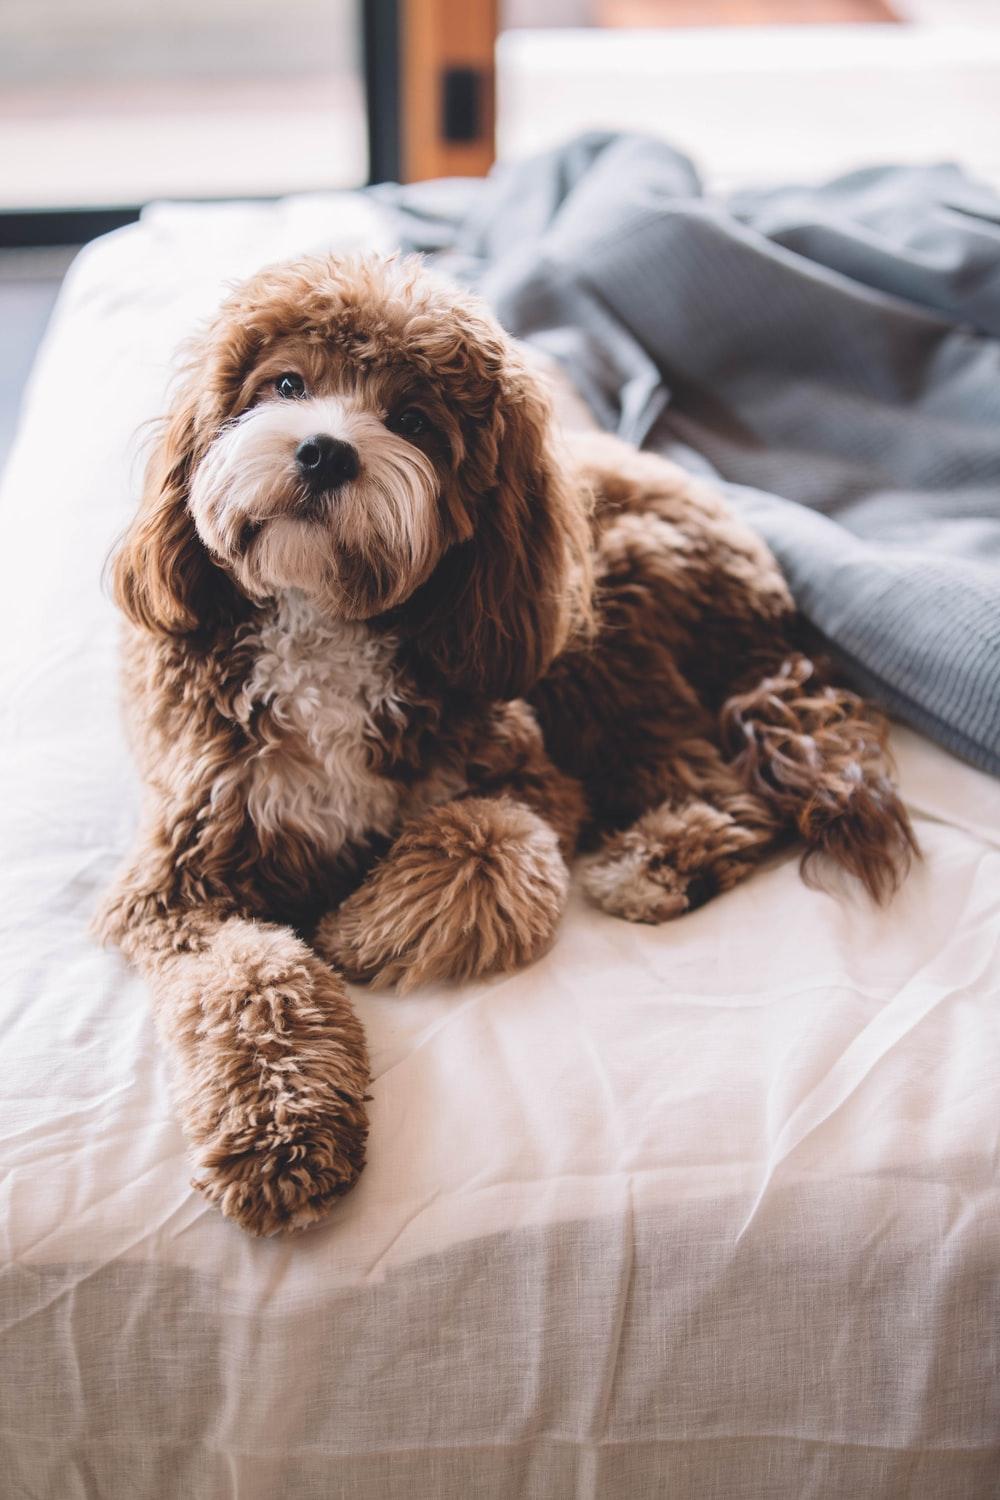 Cavoodle Picture. Download Free Image